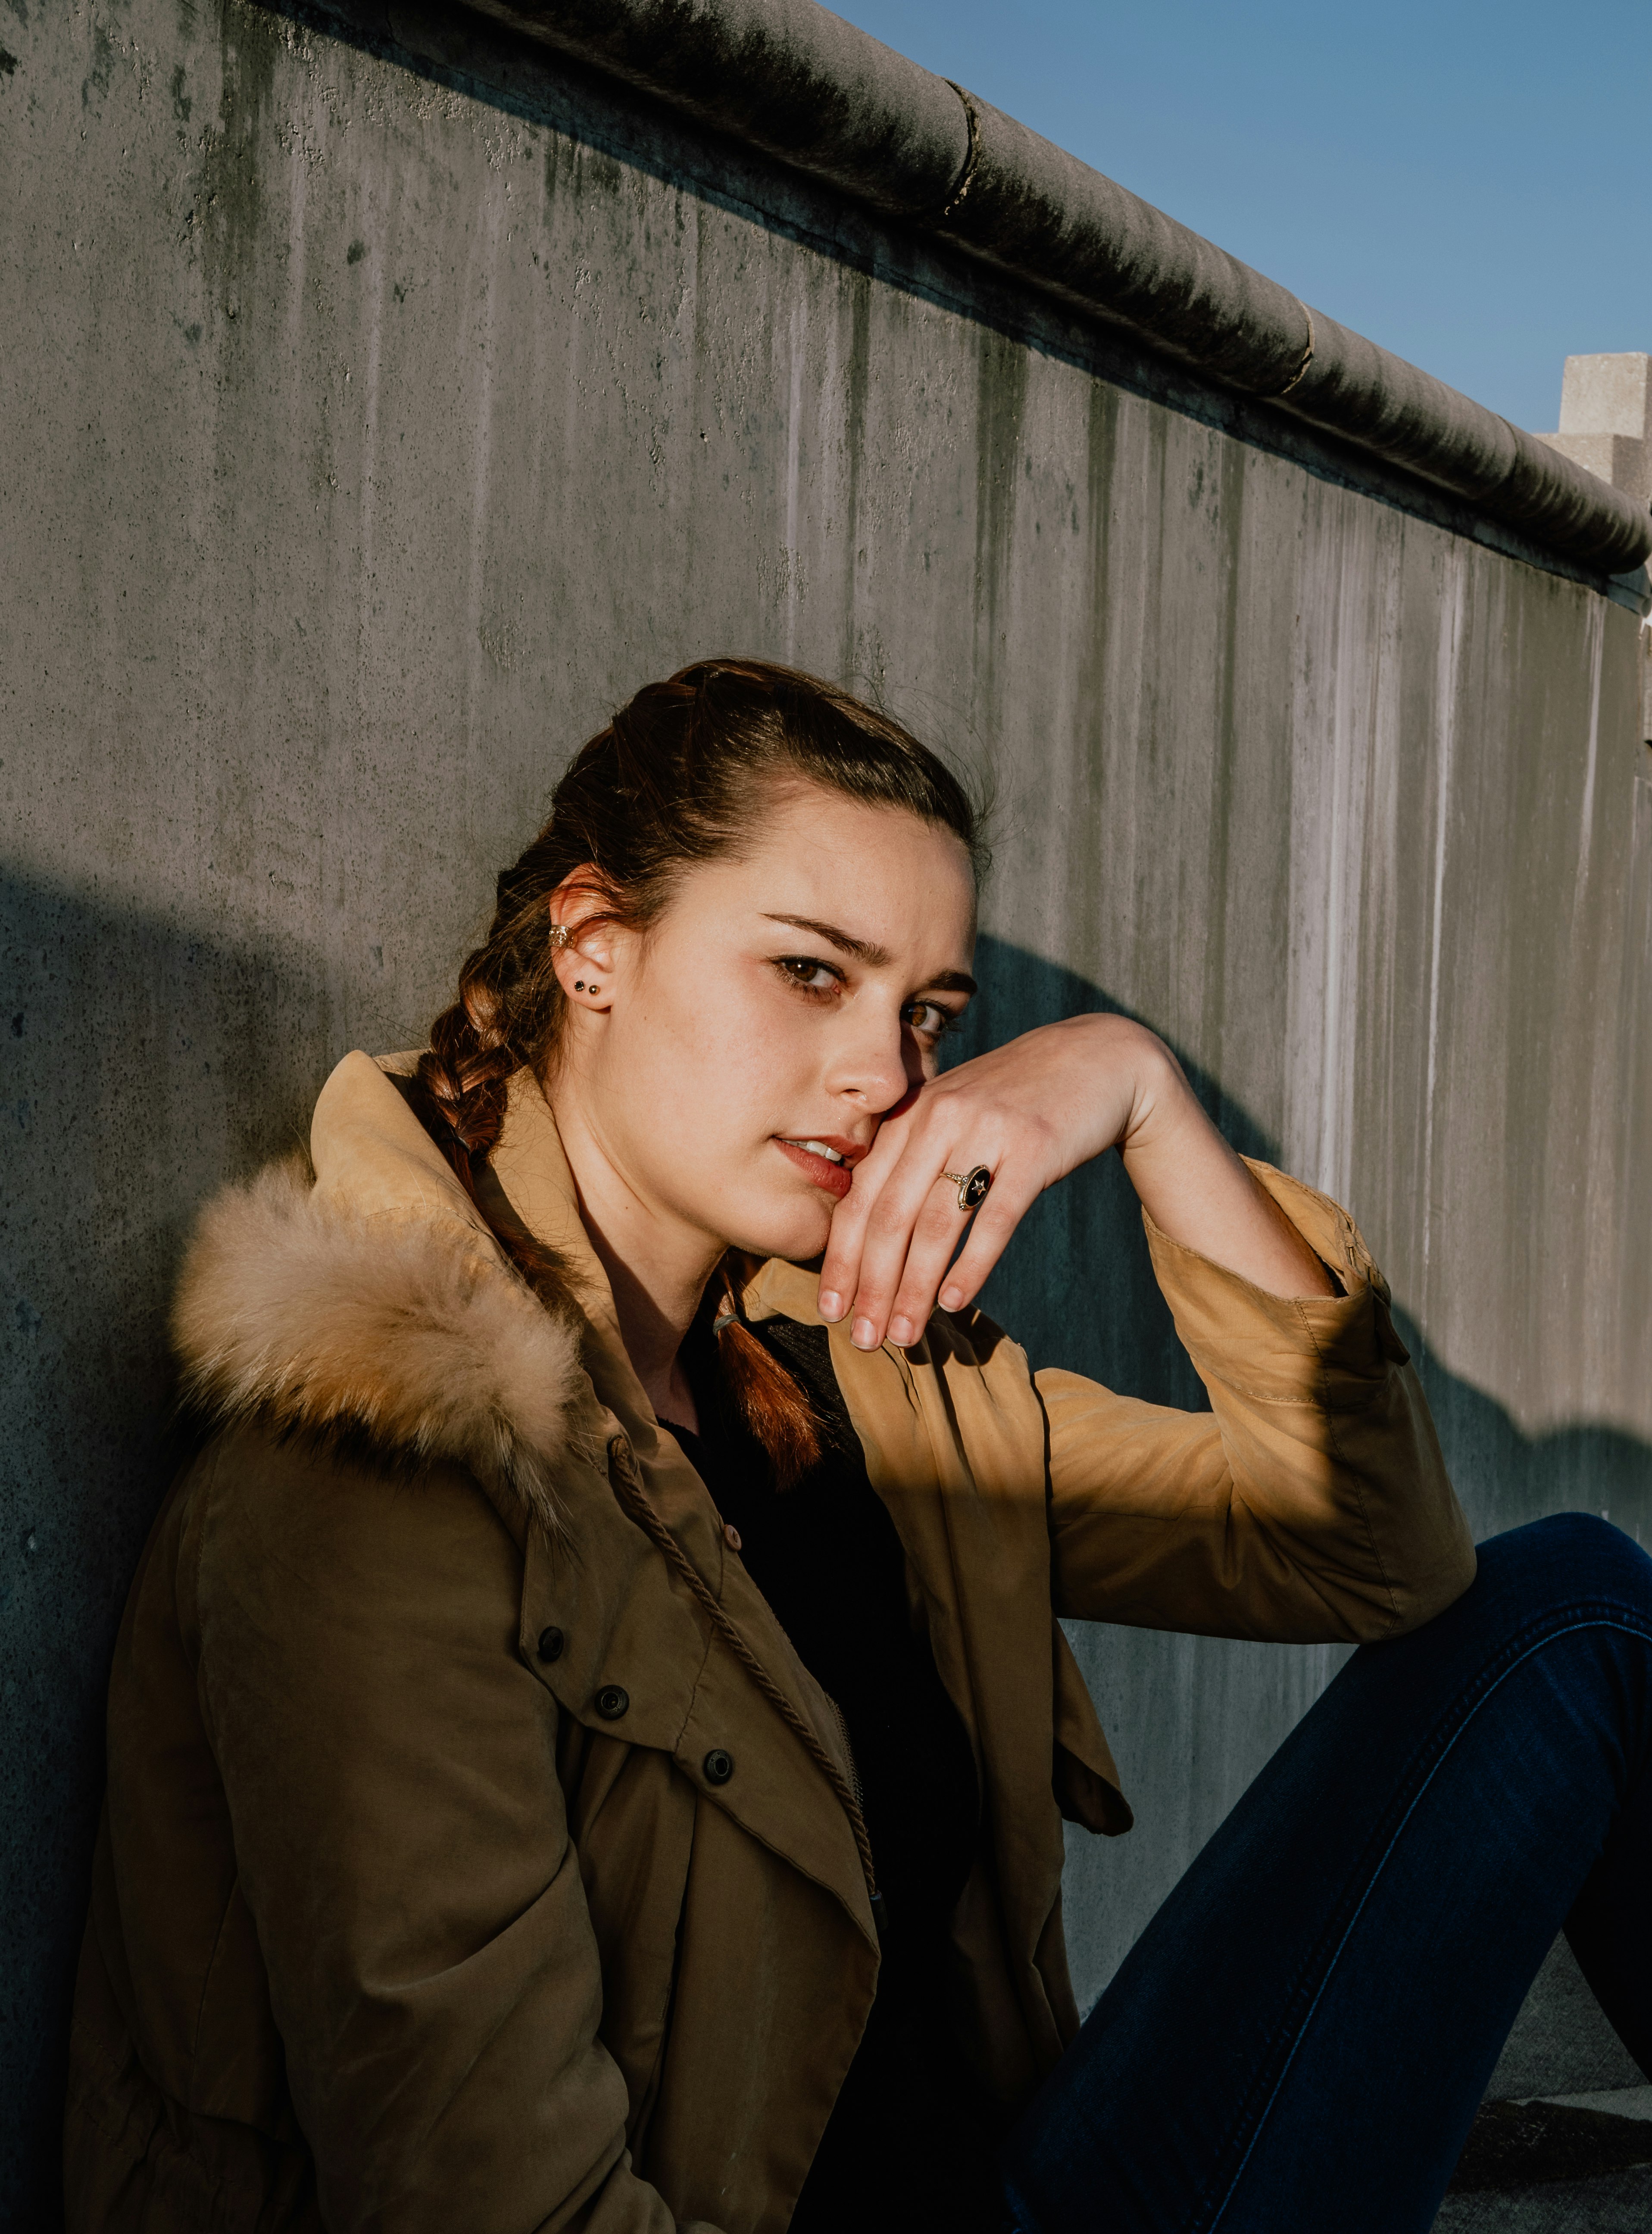 woman in brown fur neckline jacket sitting in front of concrete wall